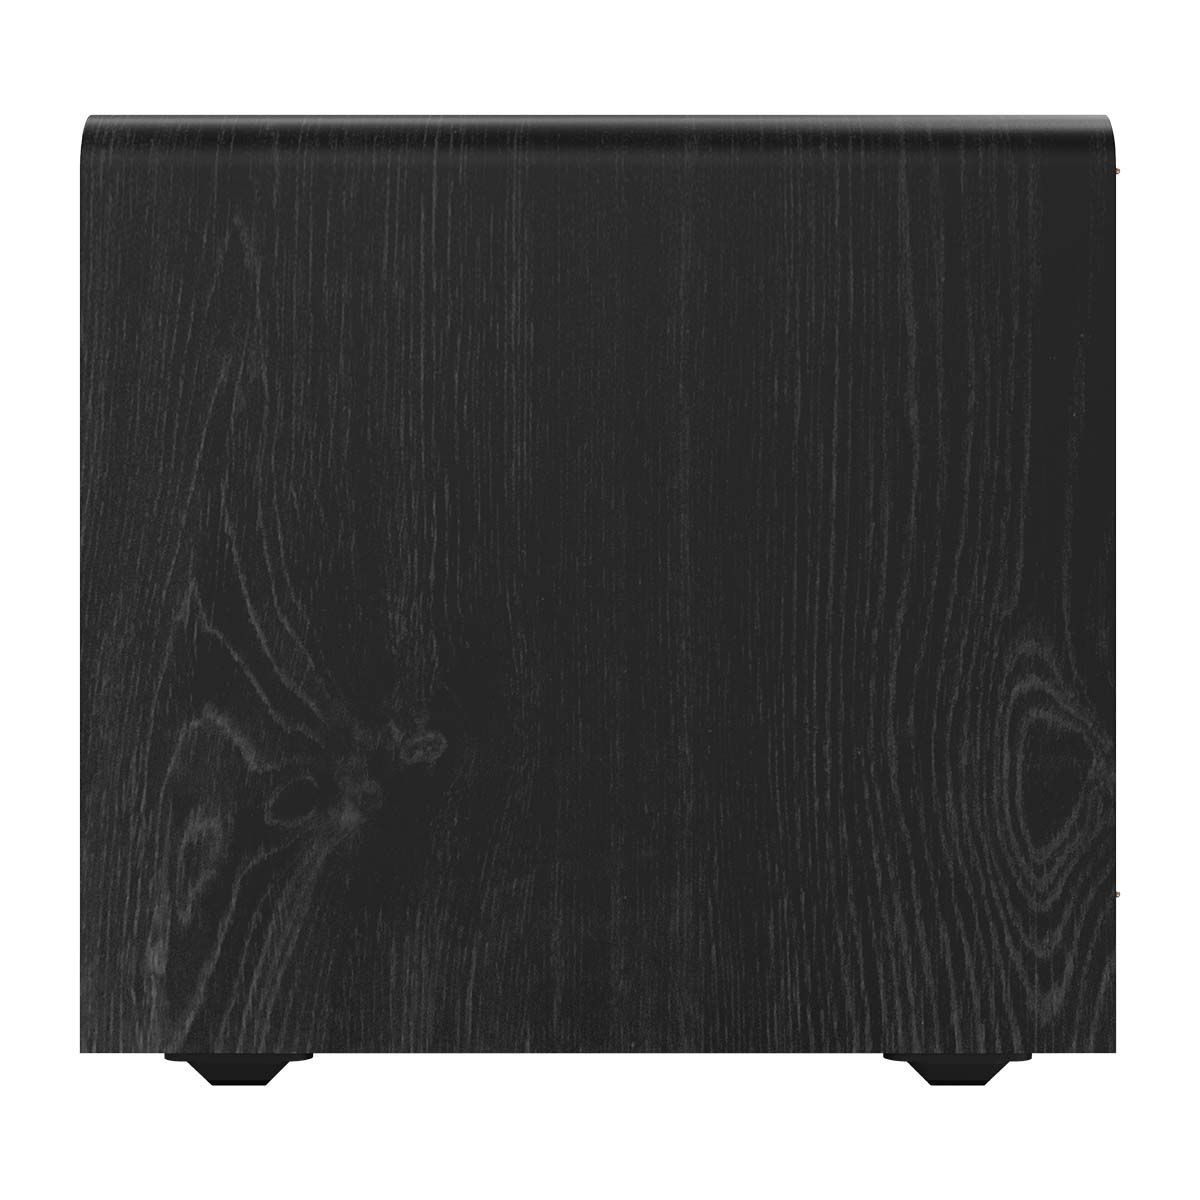 Klipsch RP-1600SW 16" Powered Subwoofer - Ebony - side view without grille